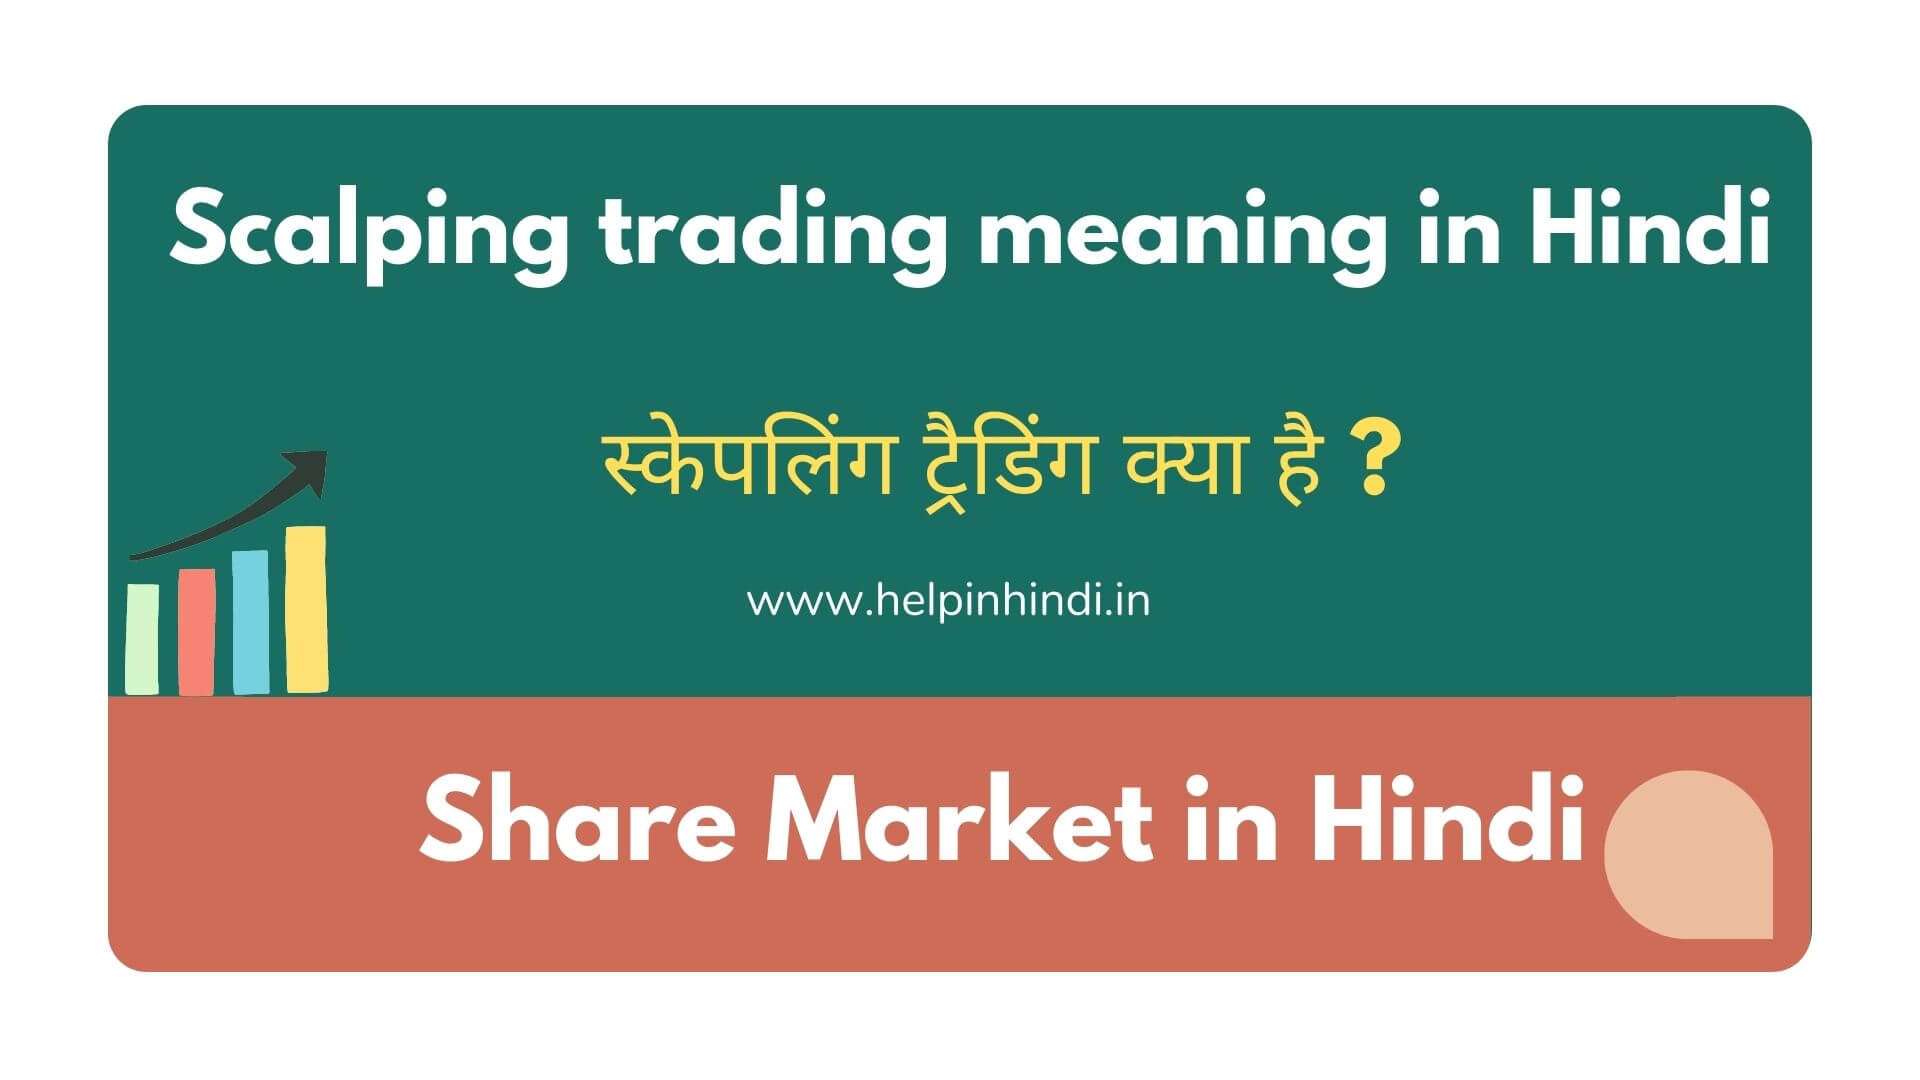 Scalping trading meaning in Hindi